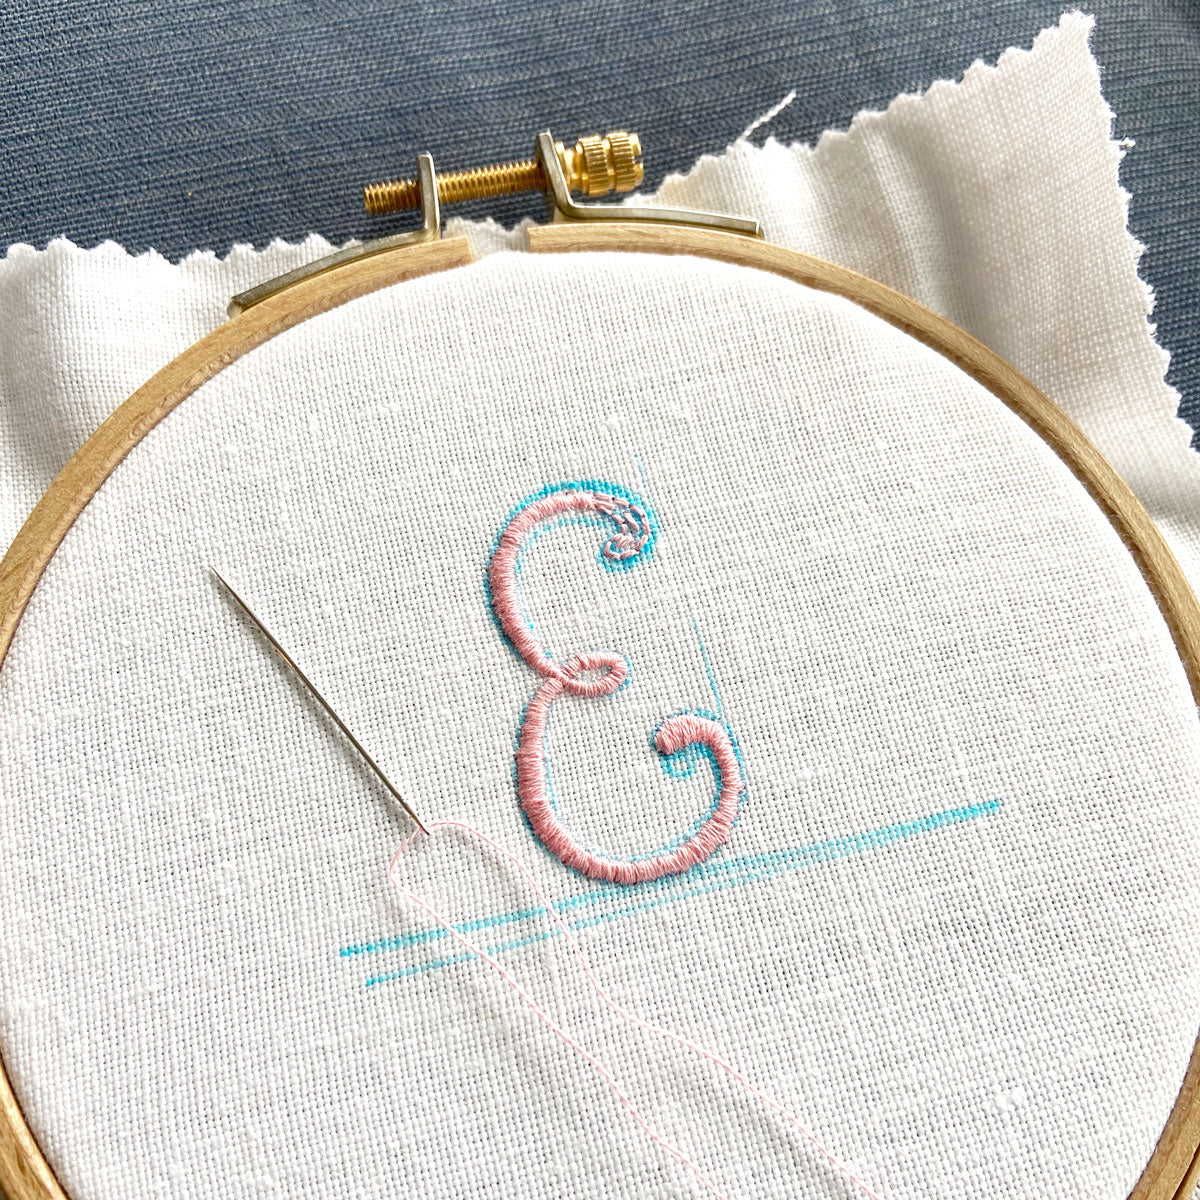 "E" Hand Embroidered Floral Monogram Art